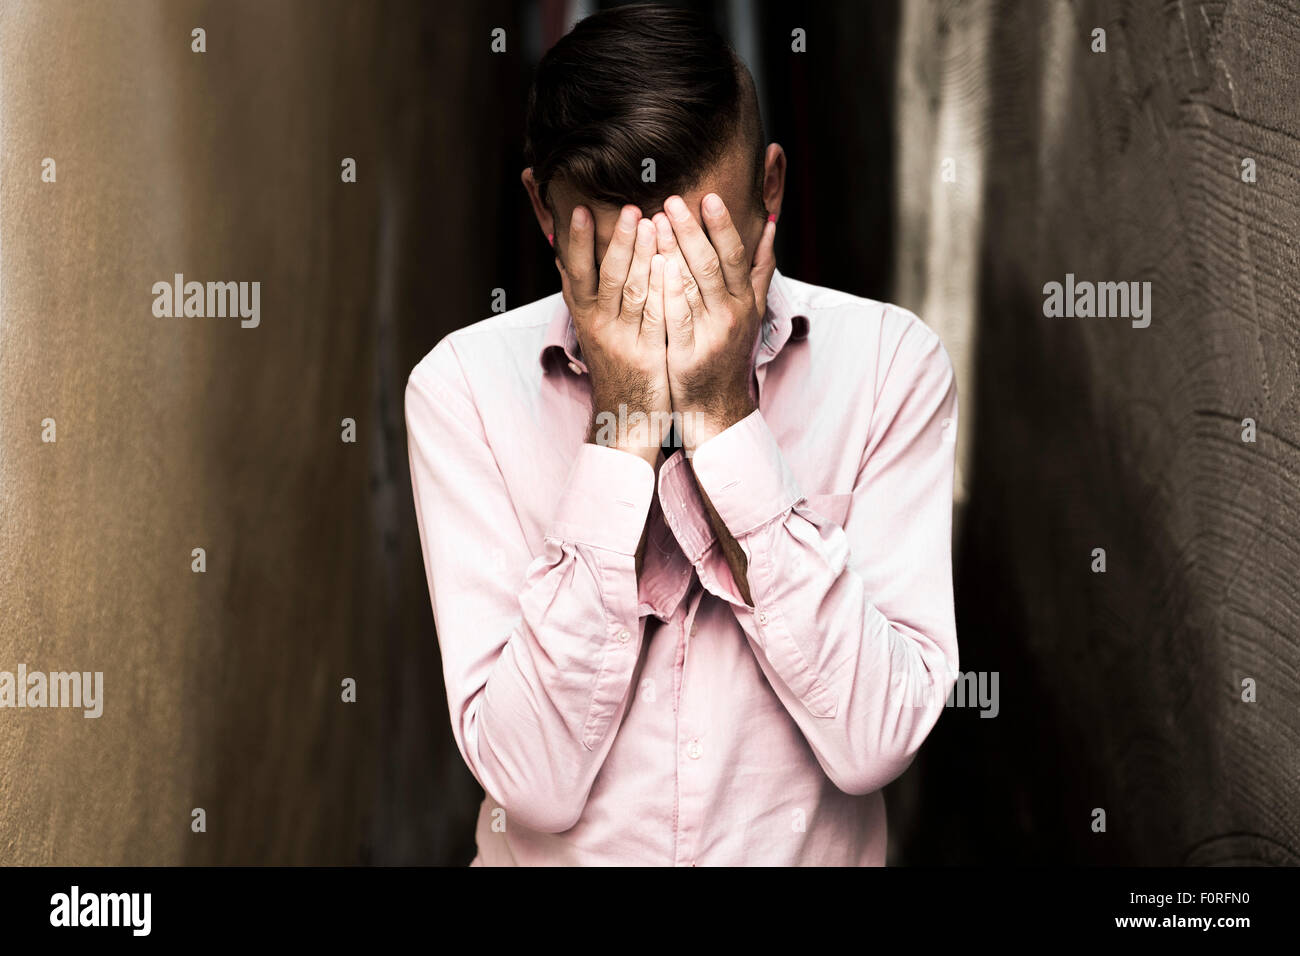 Portrait of young, depressed man in pain Stock Photo